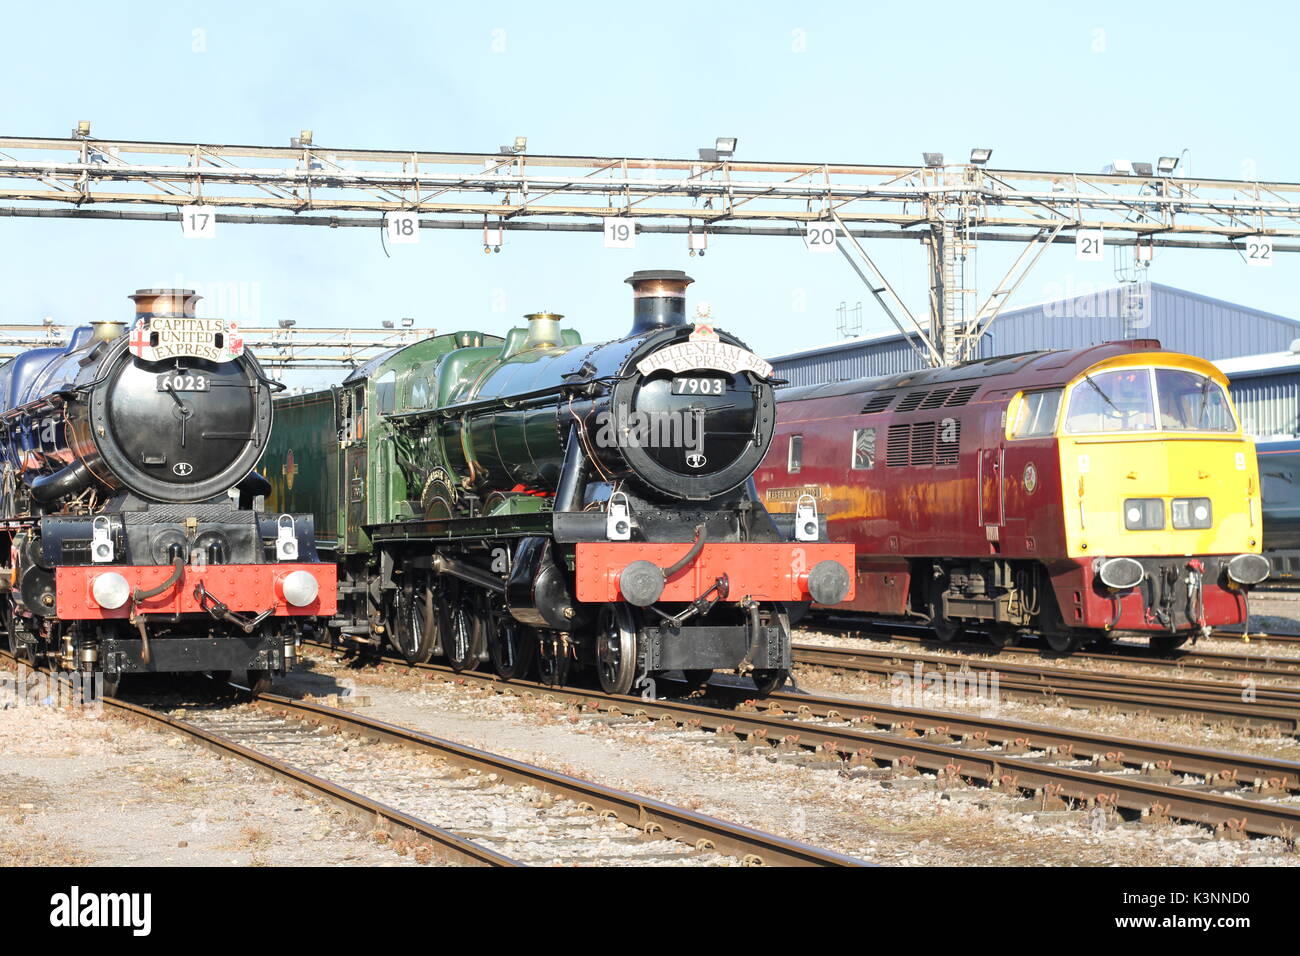 GWR King Class Locomotive 6023 King Edward II with GWR Hall  Class Locomotive 7903 Foremarke Hall and D1015 Western Champion. Old Oak Common 2nd Sept Stock Photo